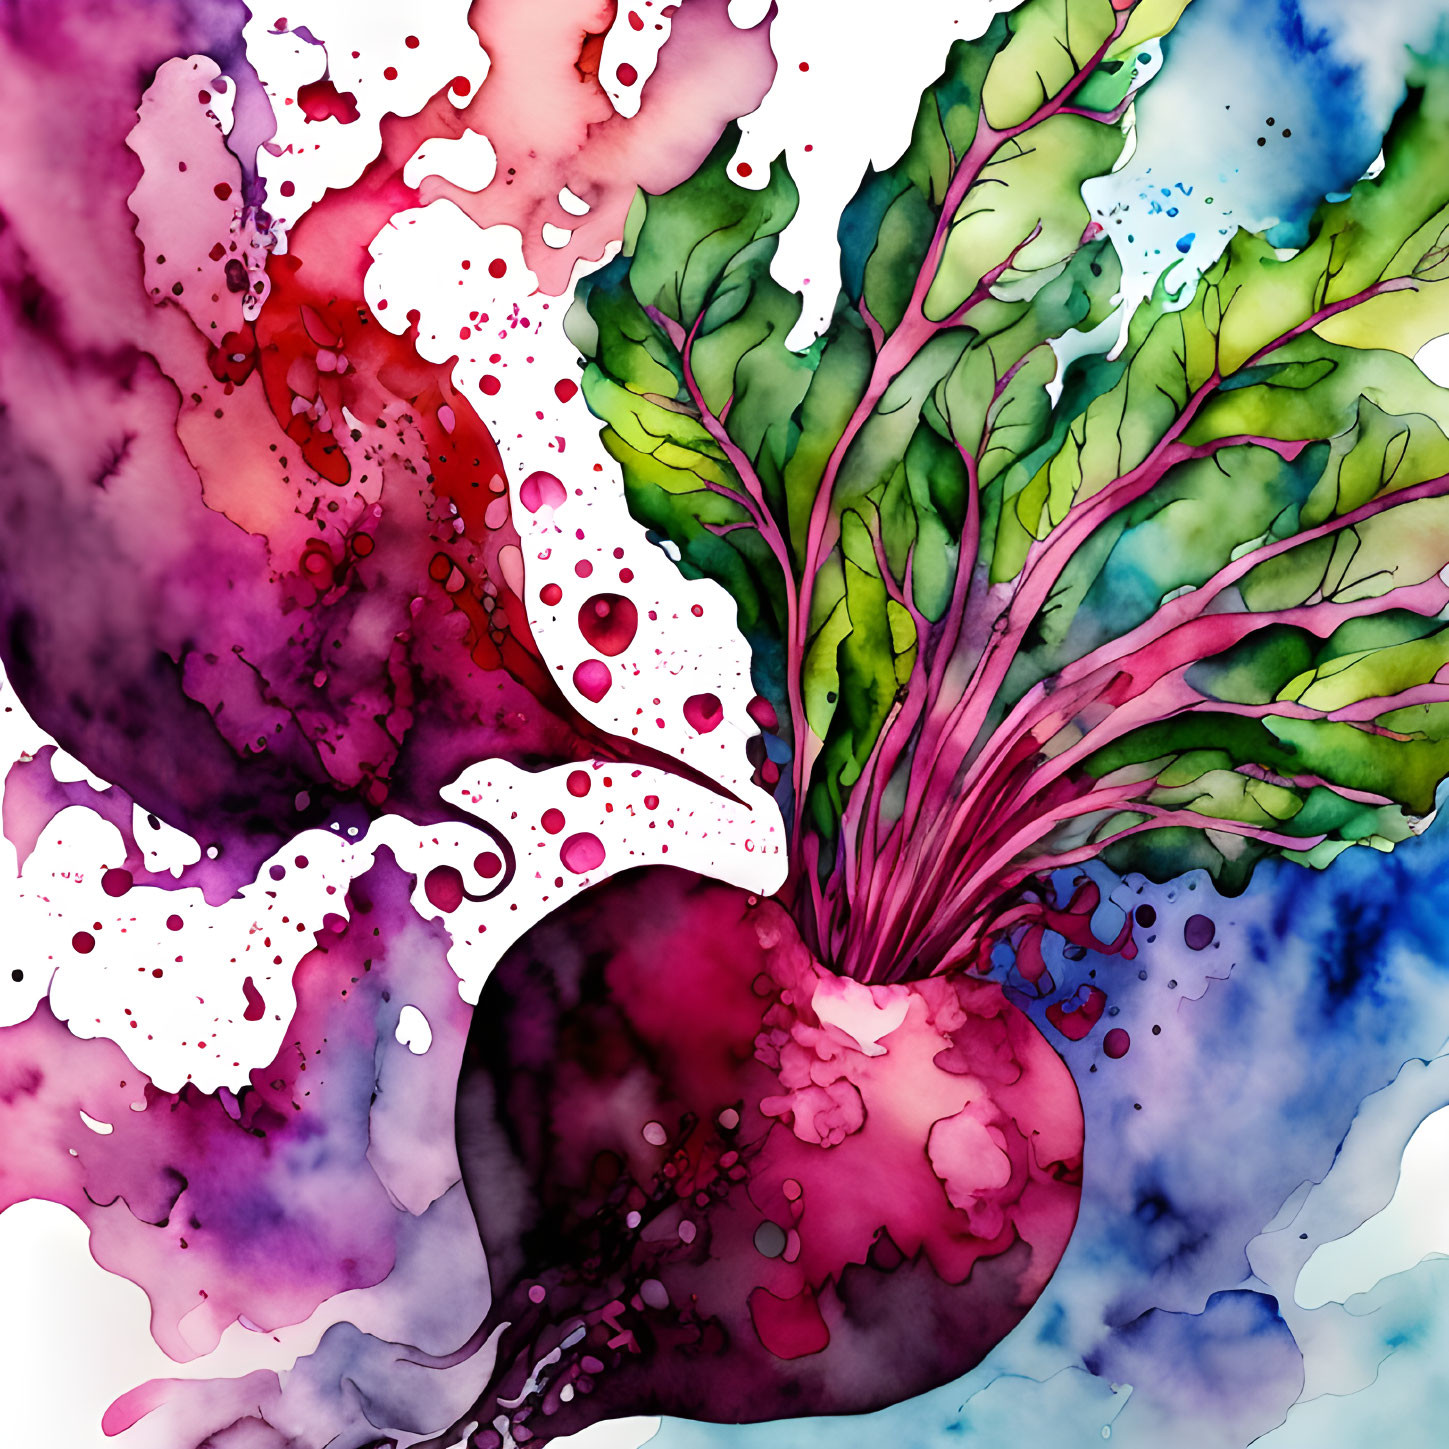 Surreal Watercolor of Beetroot's Abstract Dance